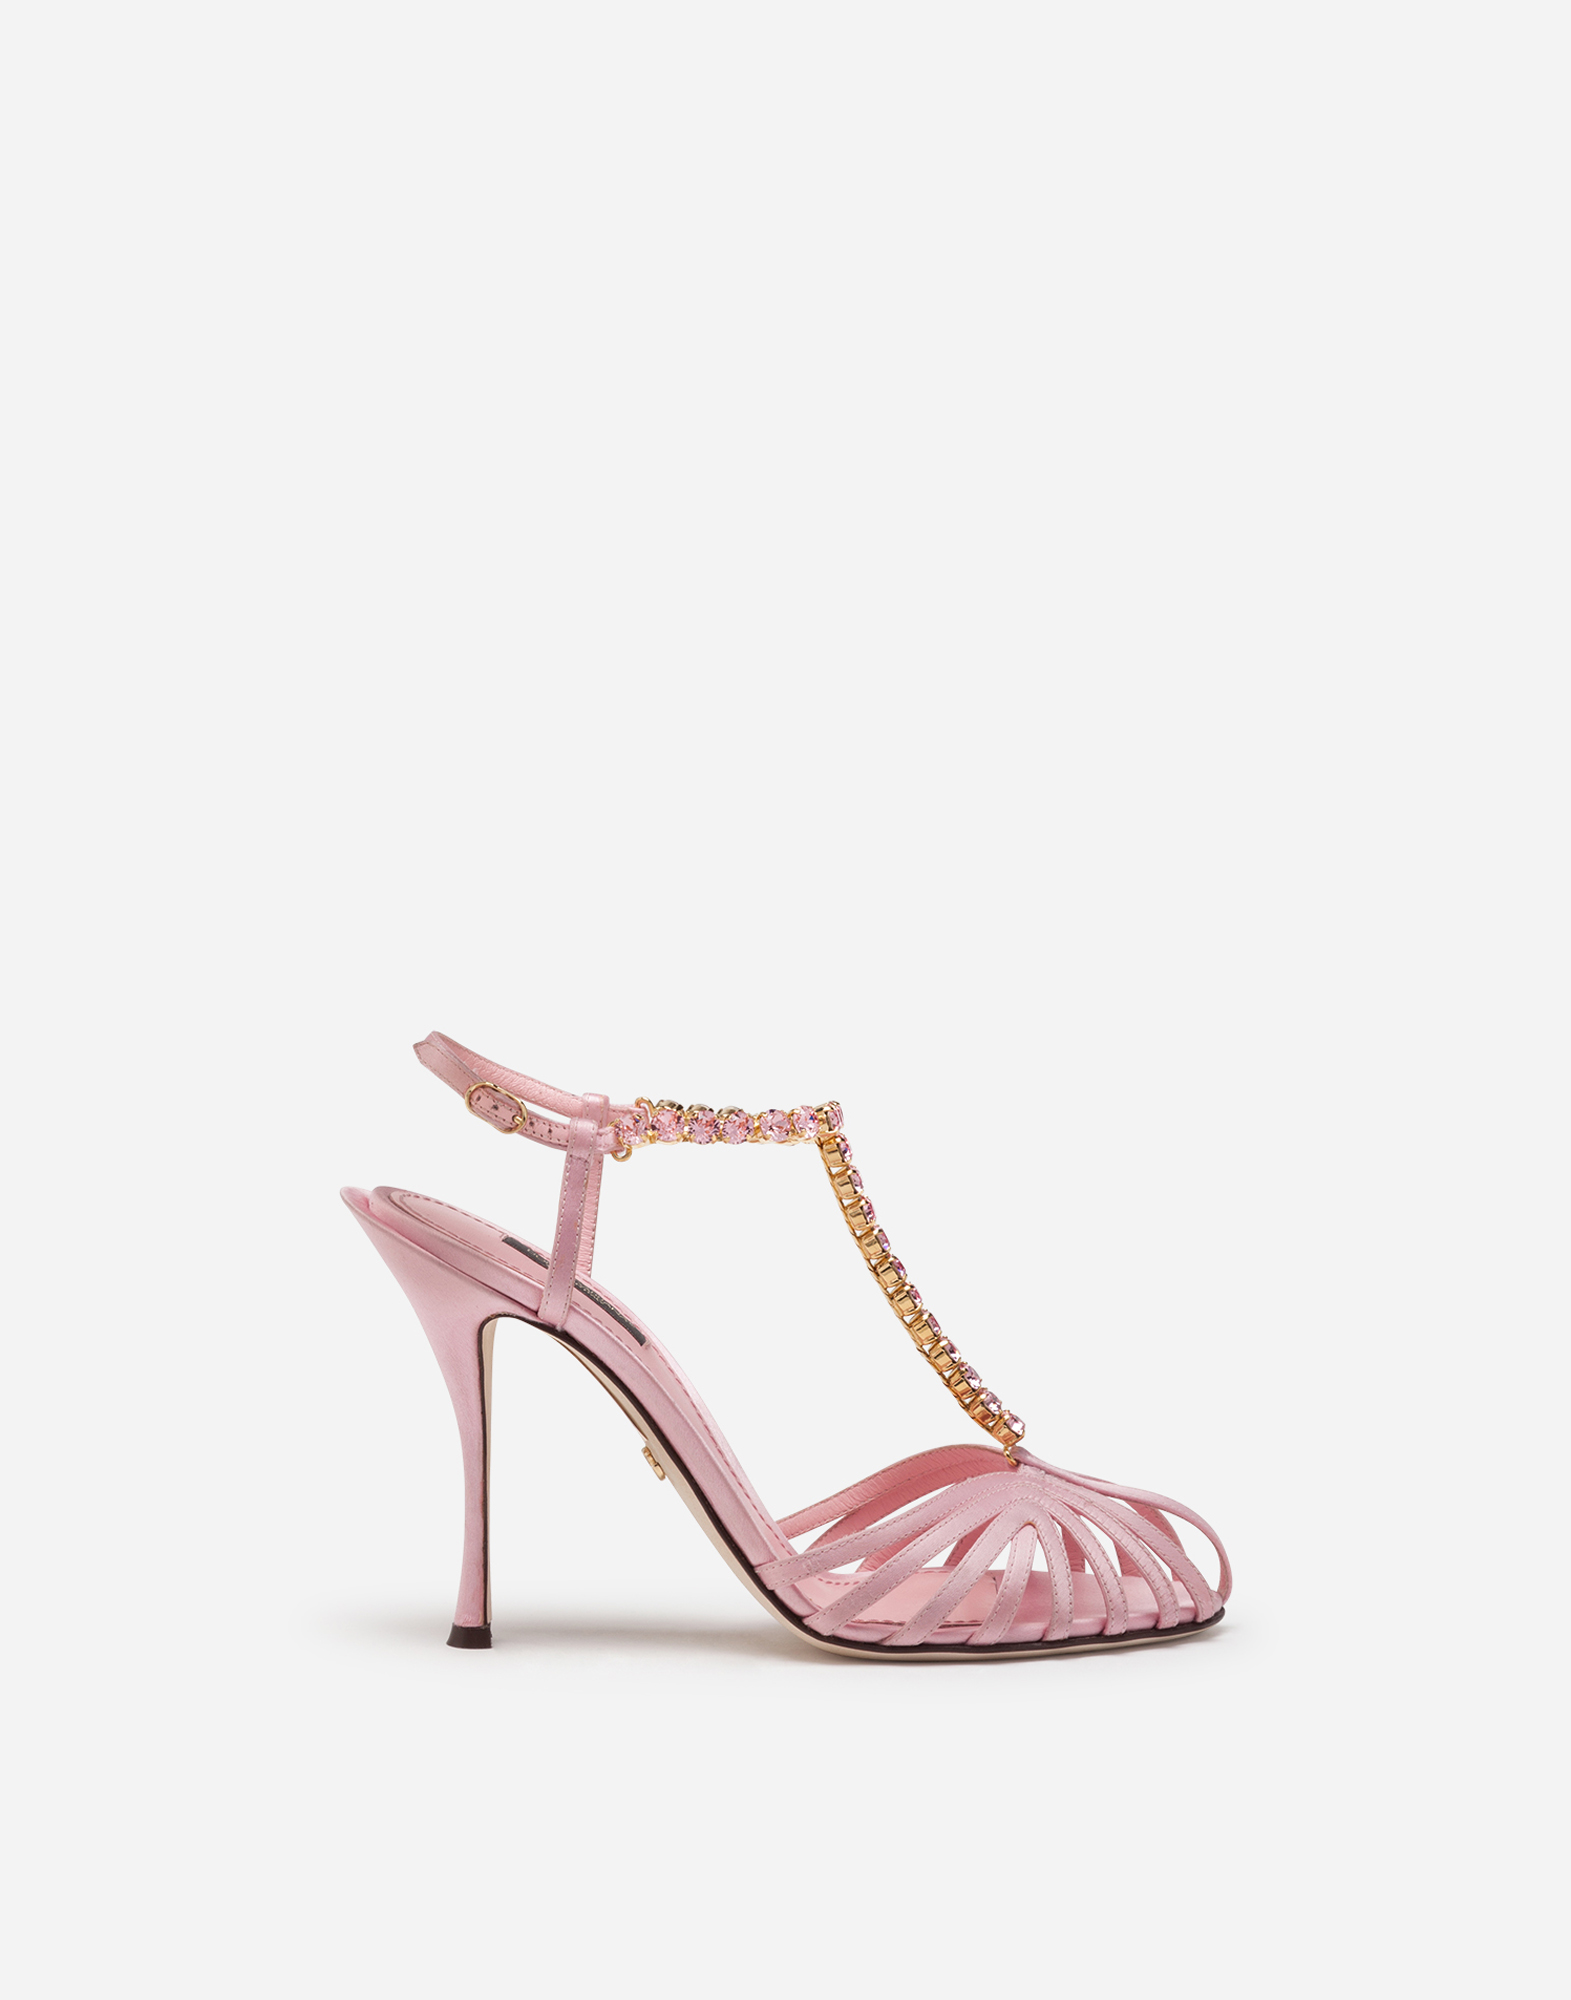 Dolce & Gabbana Satin Sandals With Jewel Application In Pink